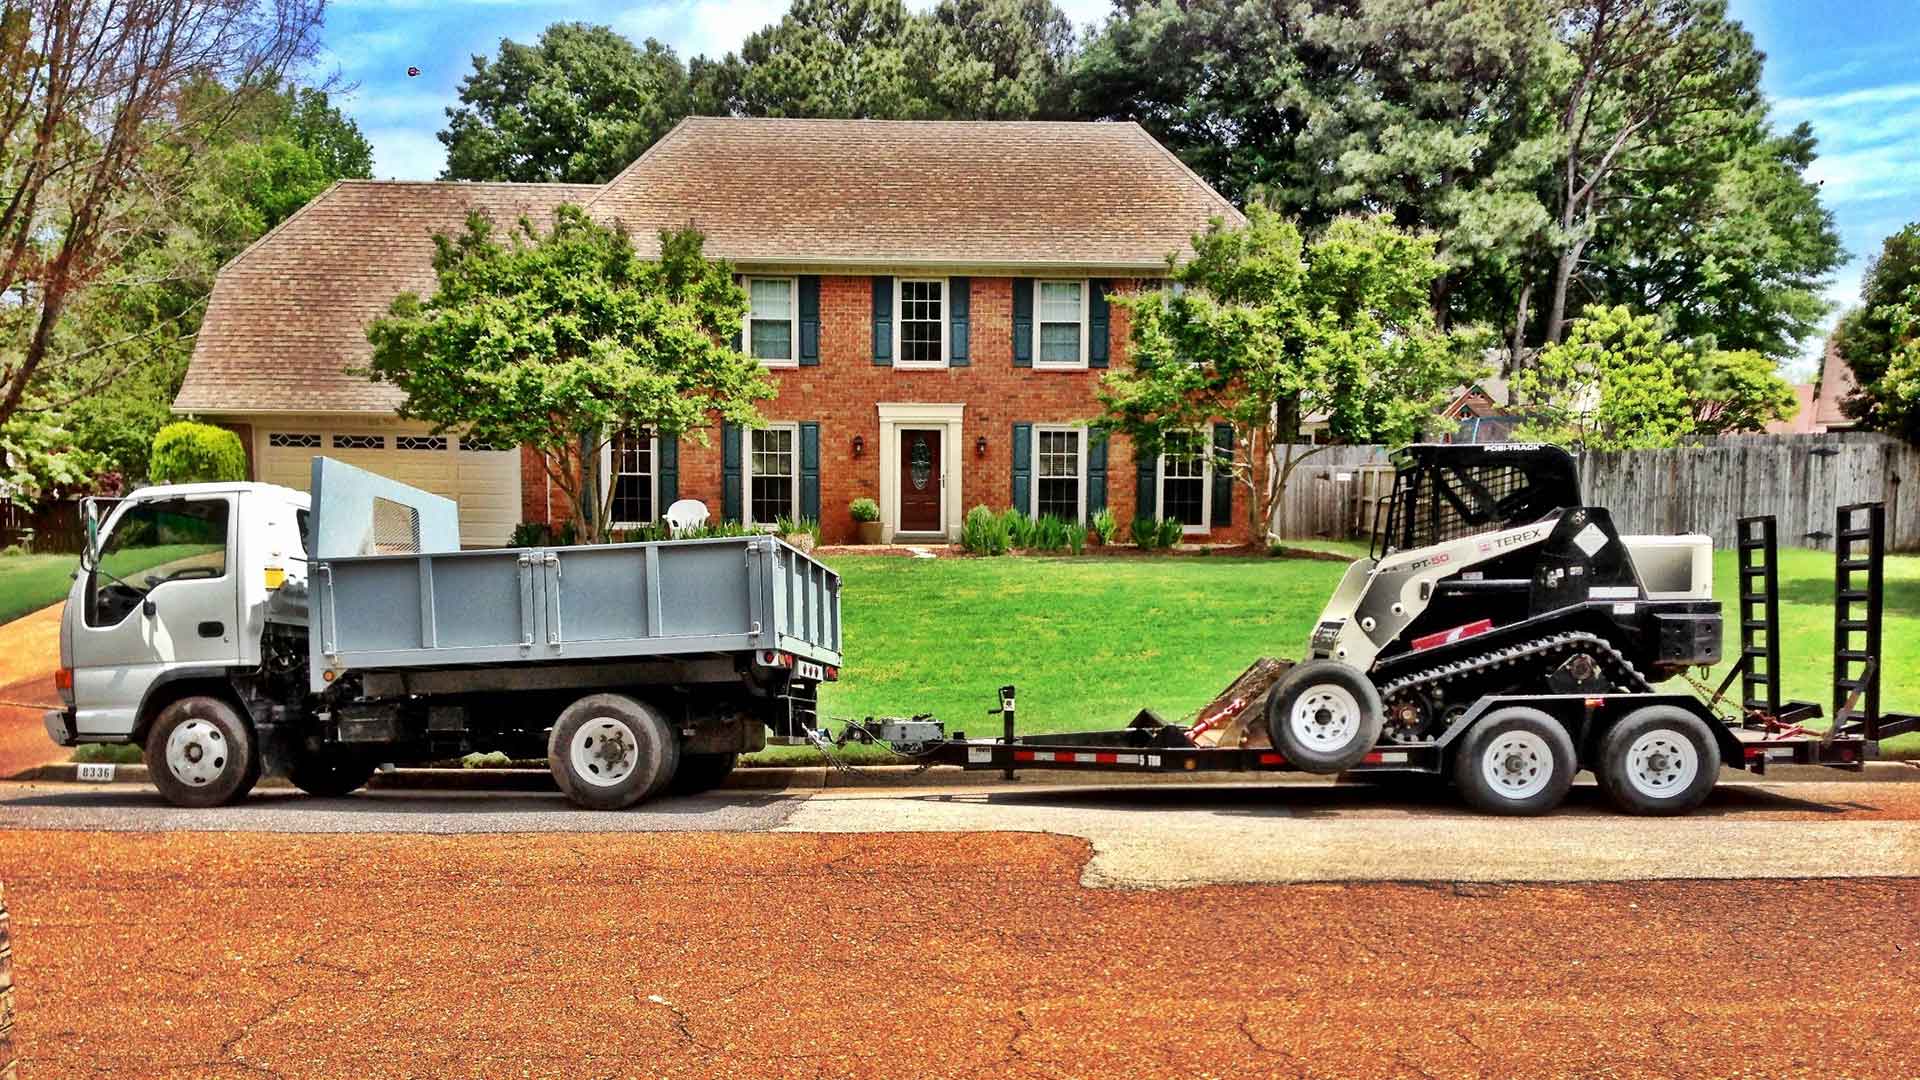 Landscaping equipment at a property in Uptown Memphis, Tennessee.